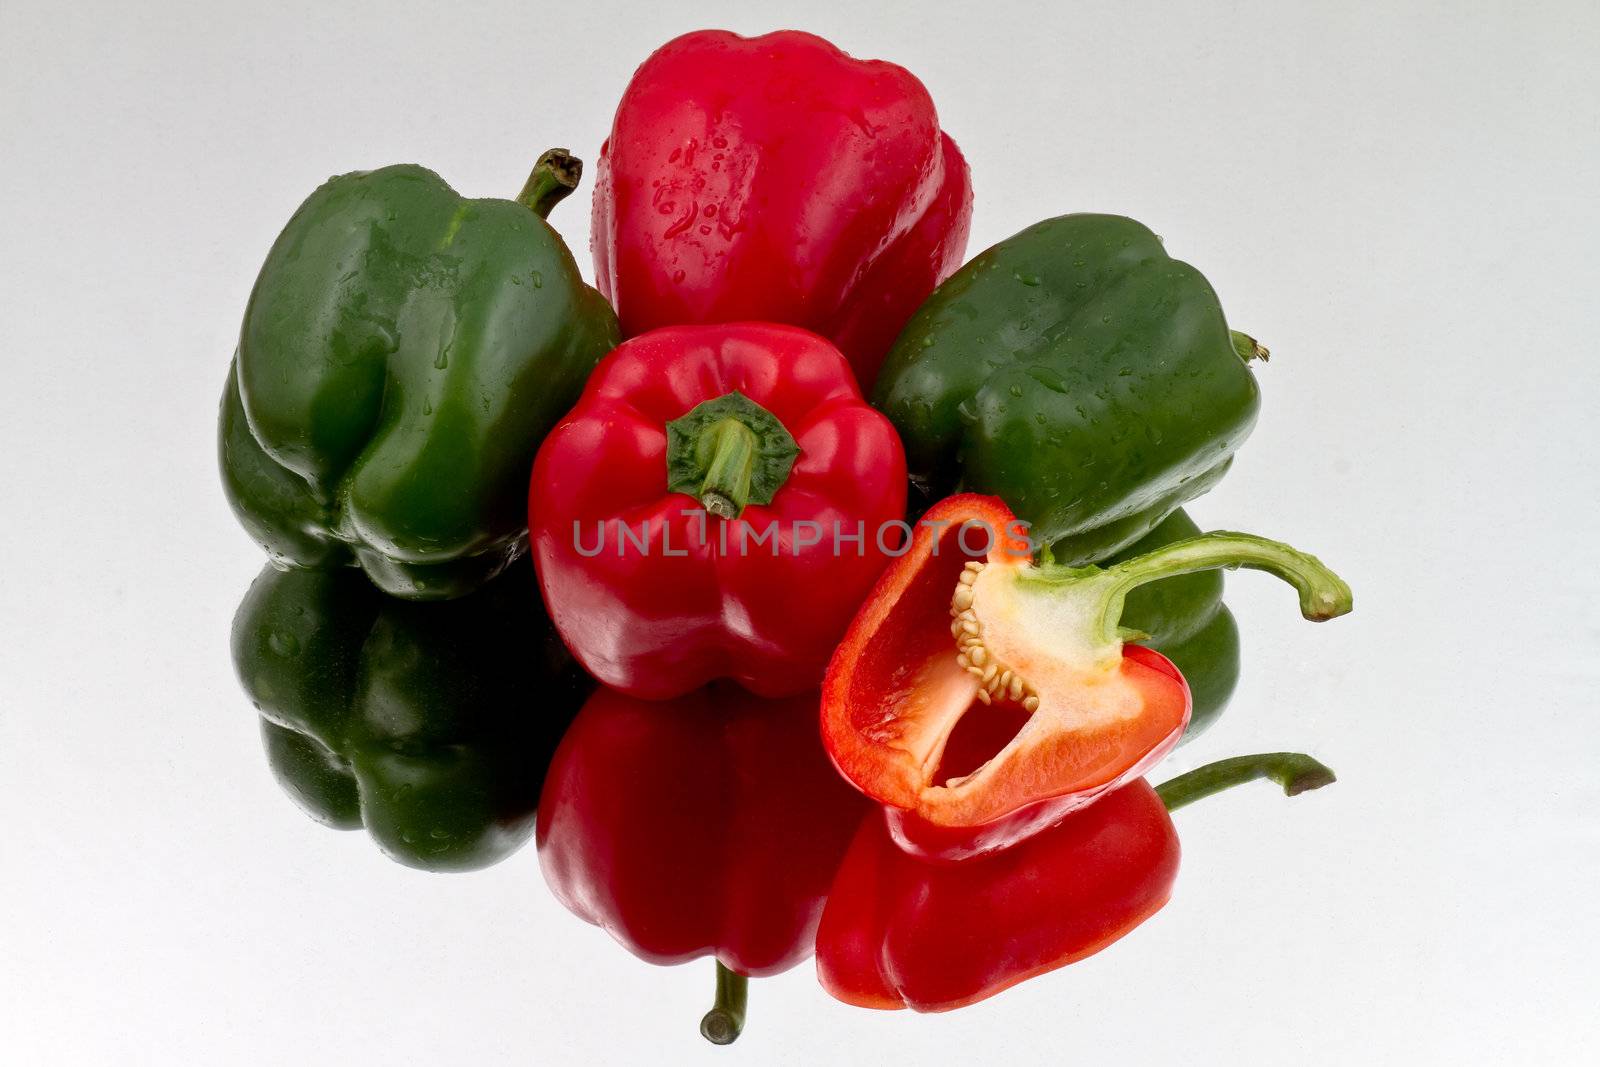 Red and green bell peppers on reflective bacground by lavsen